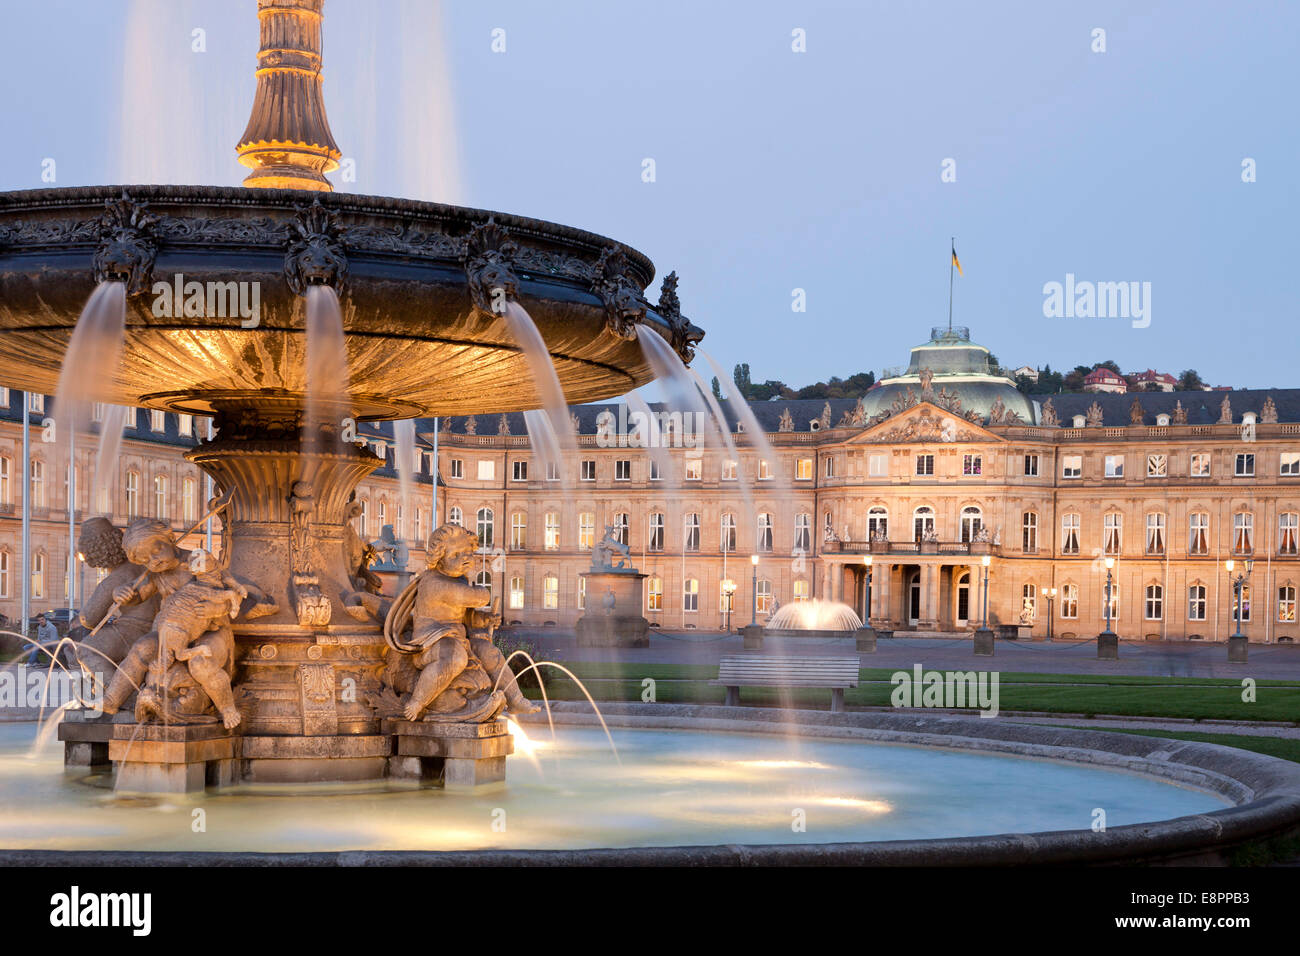 fountain on Schloßplatz square and the New Palace in Stuttgart at night, Baden-Württemberg, Germany, Europe Stock Photo